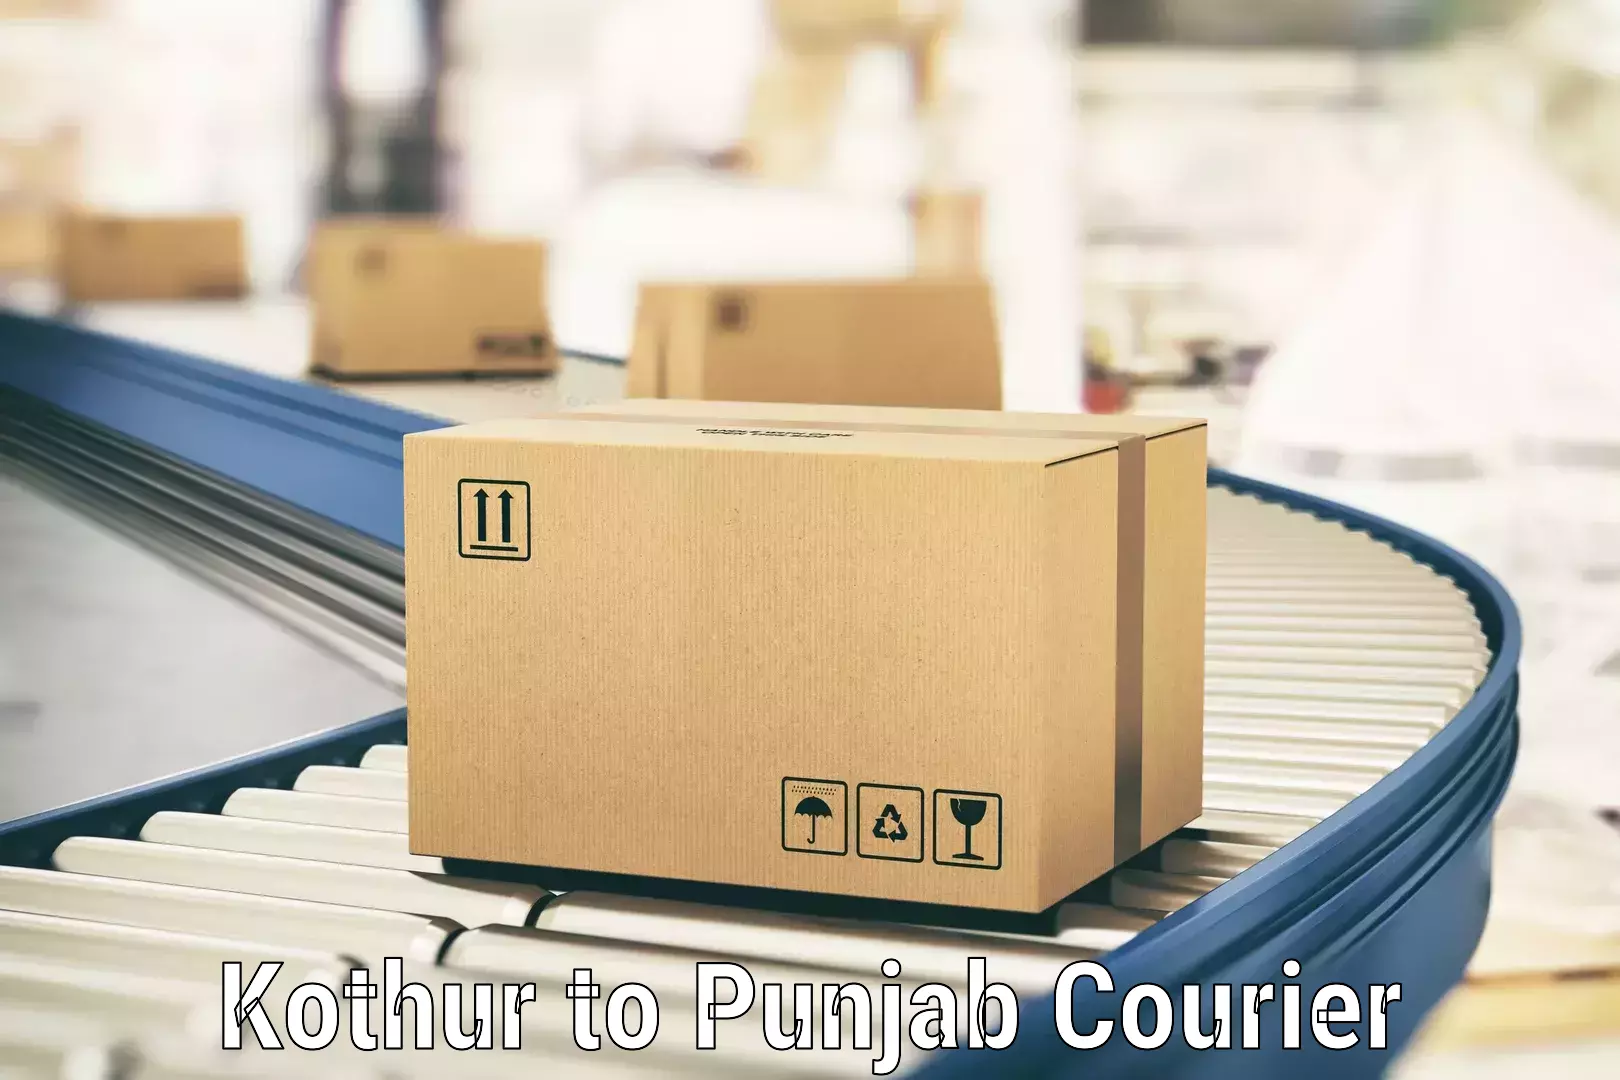 High-capacity courier solutions Kothur to Mohali